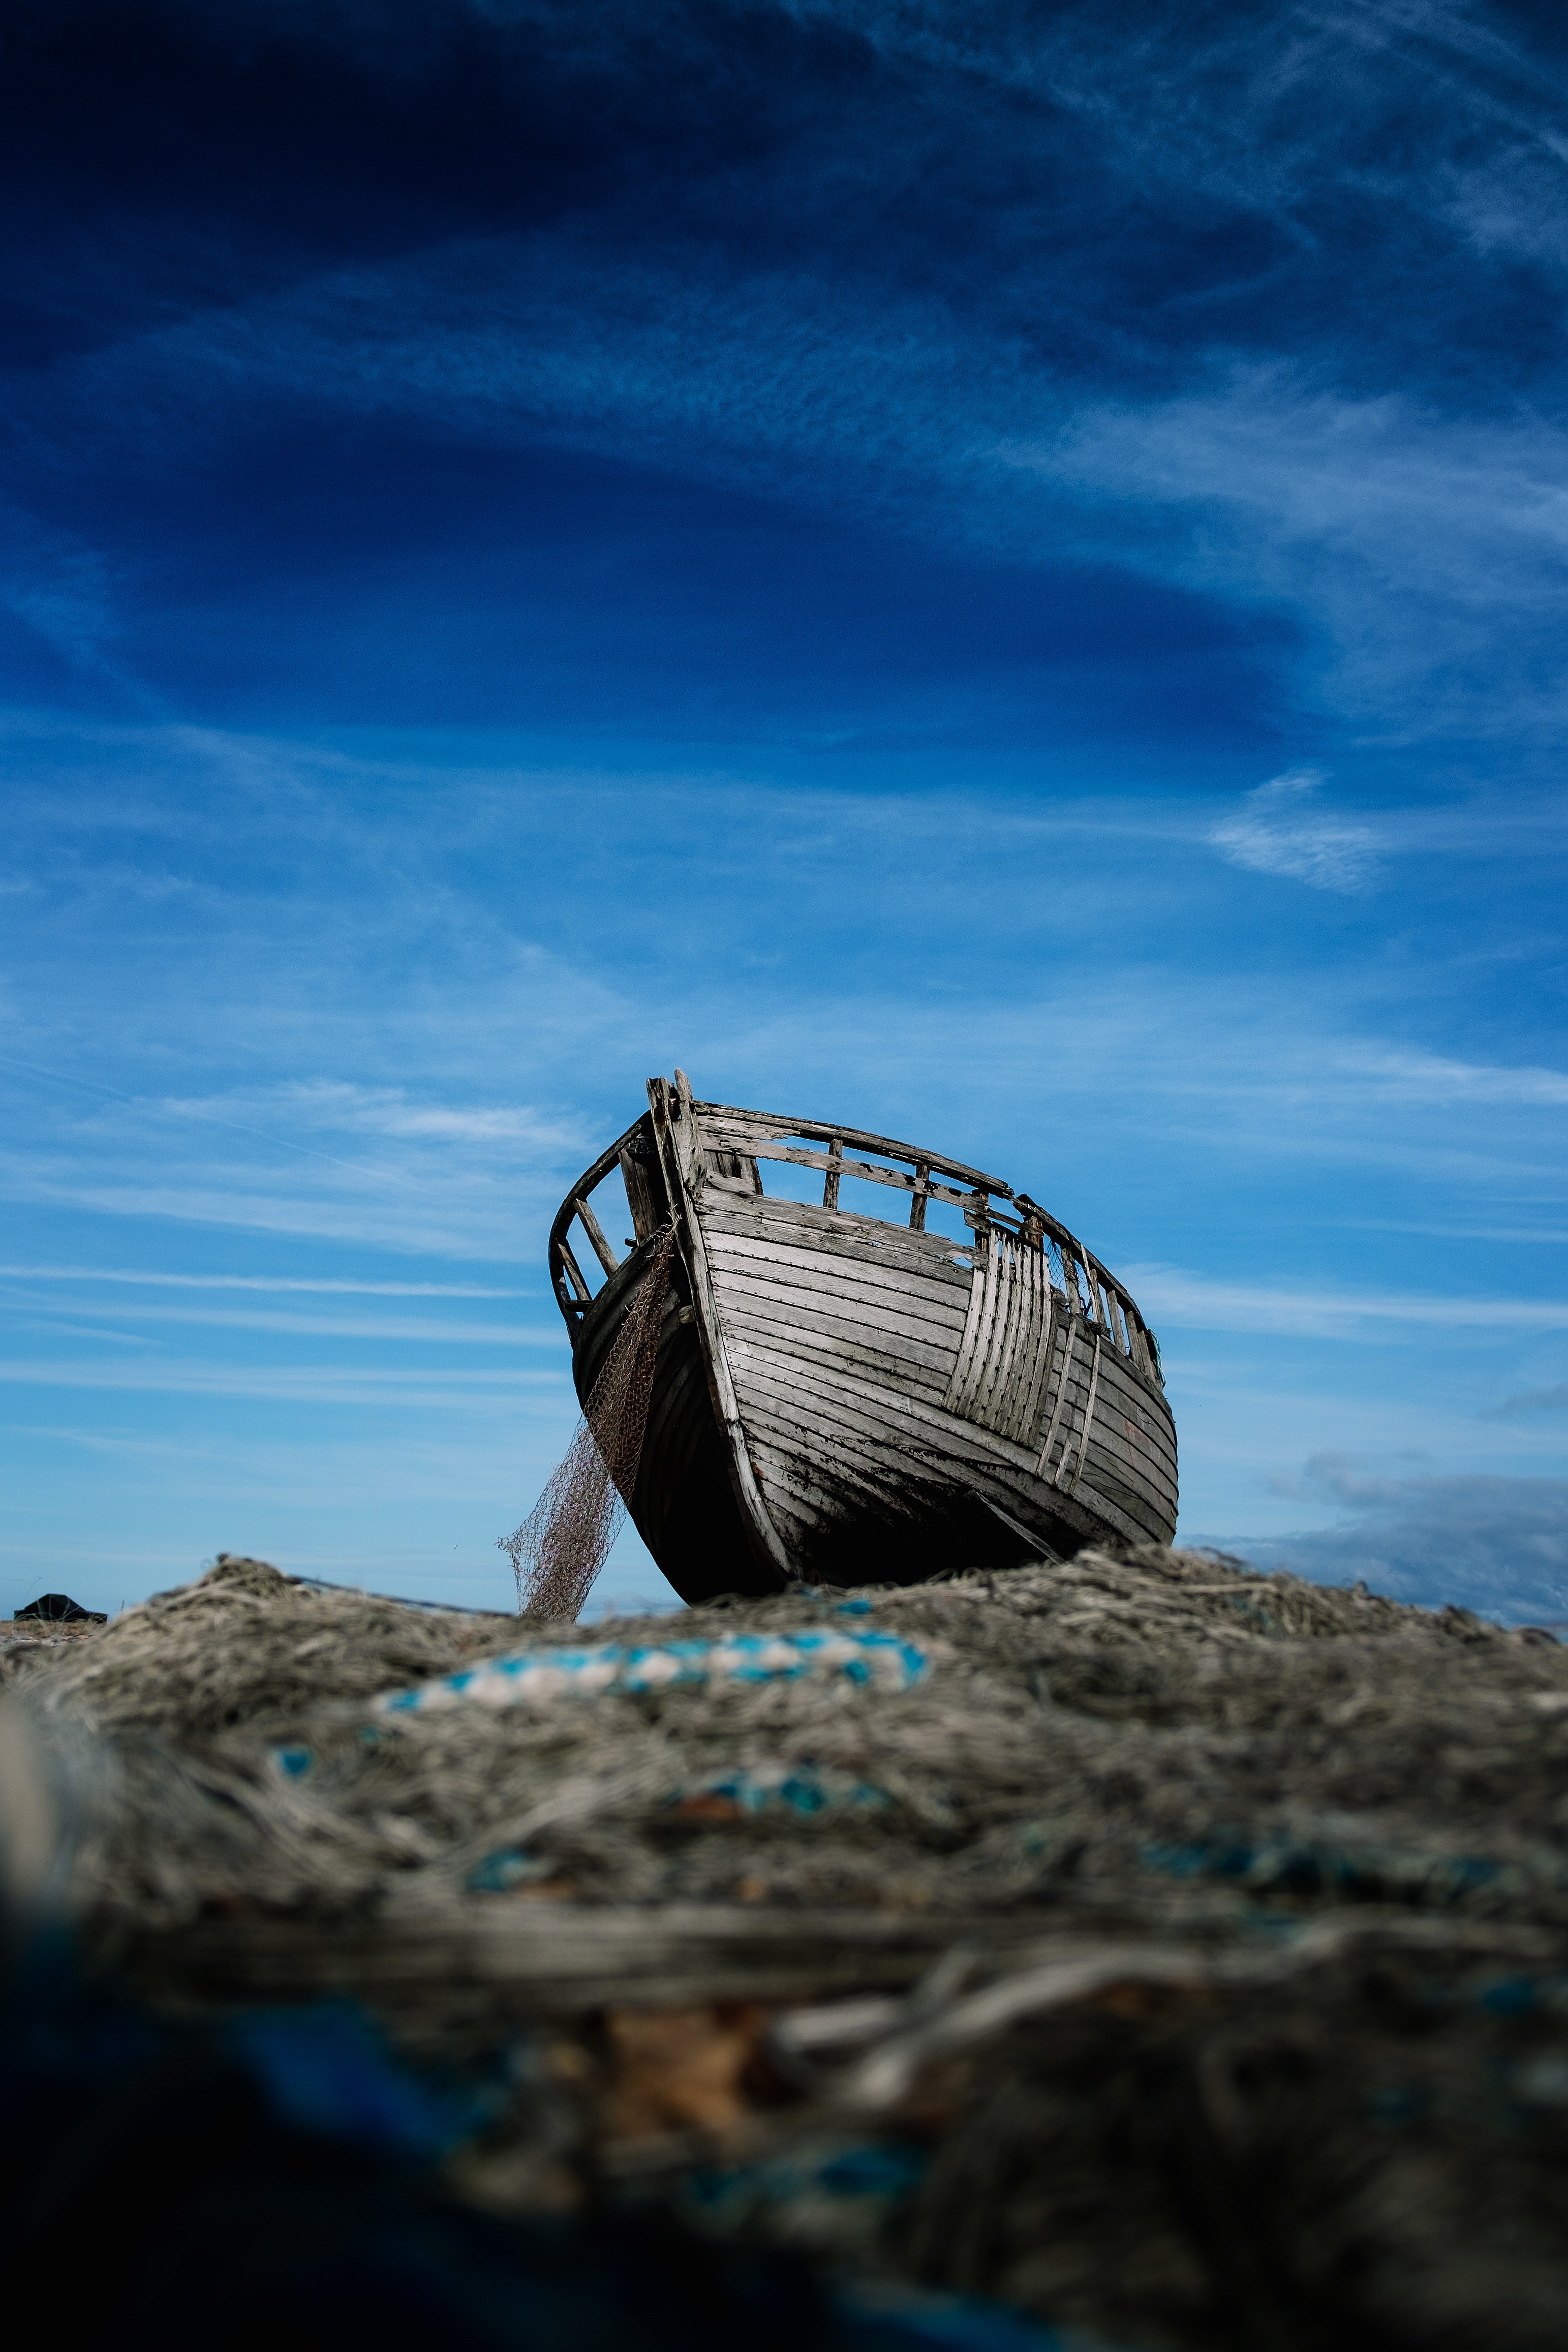 Wrecked Wooden Boat And A Blue Whispy Sky Phone Backgrounds - No One Got Your Back - HD Wallpaper 